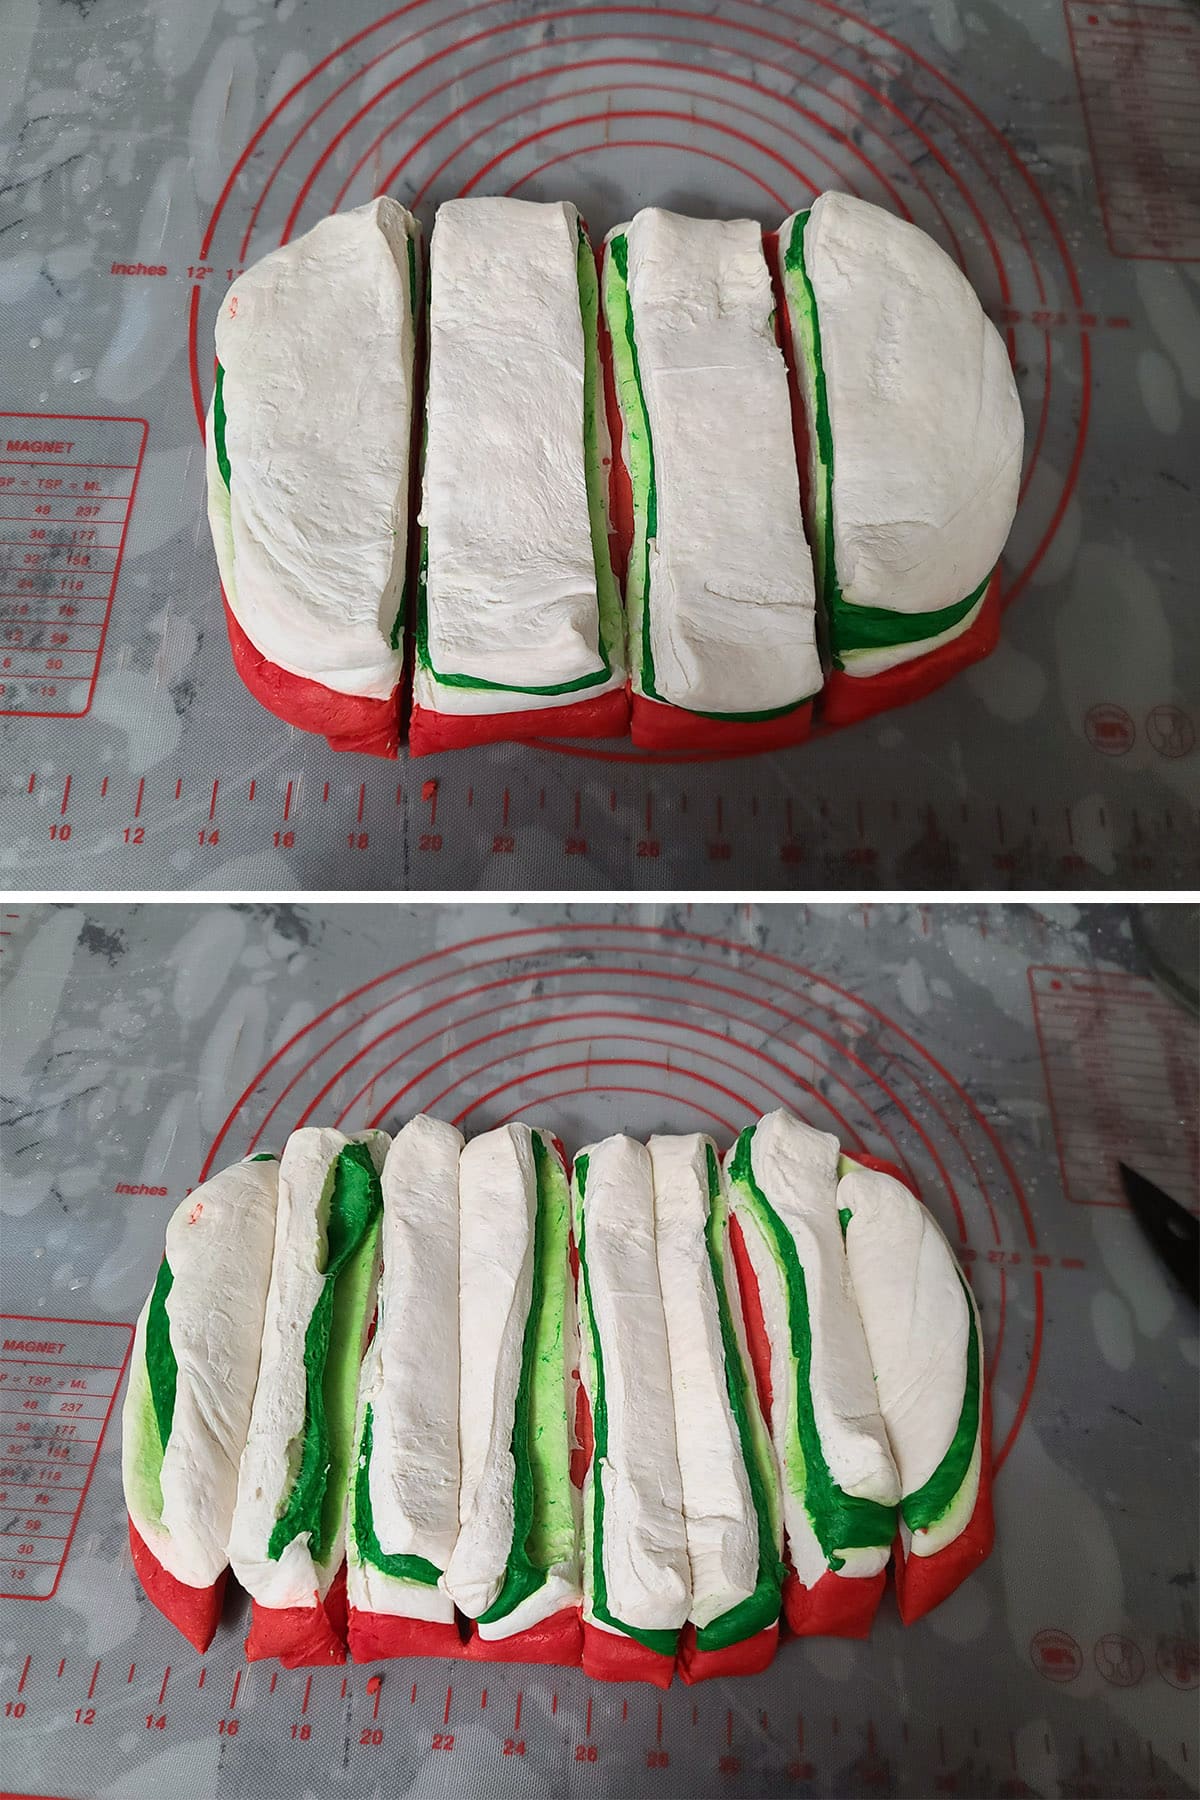 A 2 part image showing the layered block of dough being cut into 4 and then 8 strips.